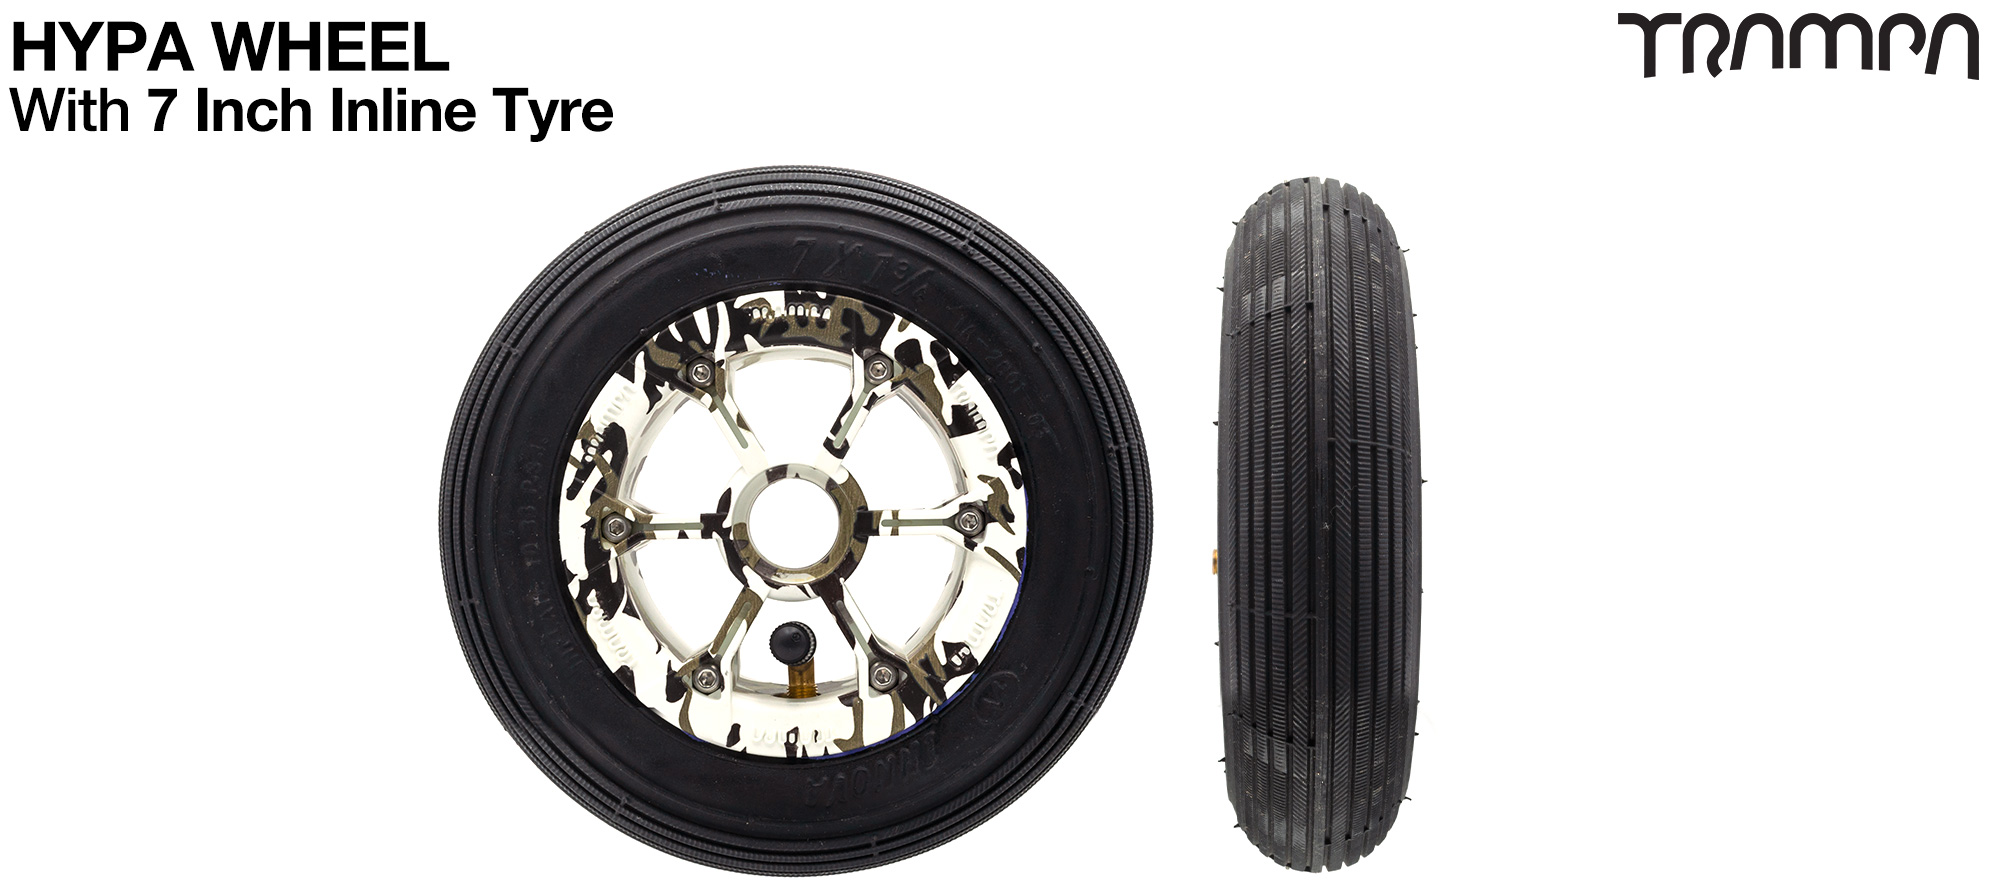 HYPA WHEELS Showing with 7 Inch INLINE Tyre (£35)